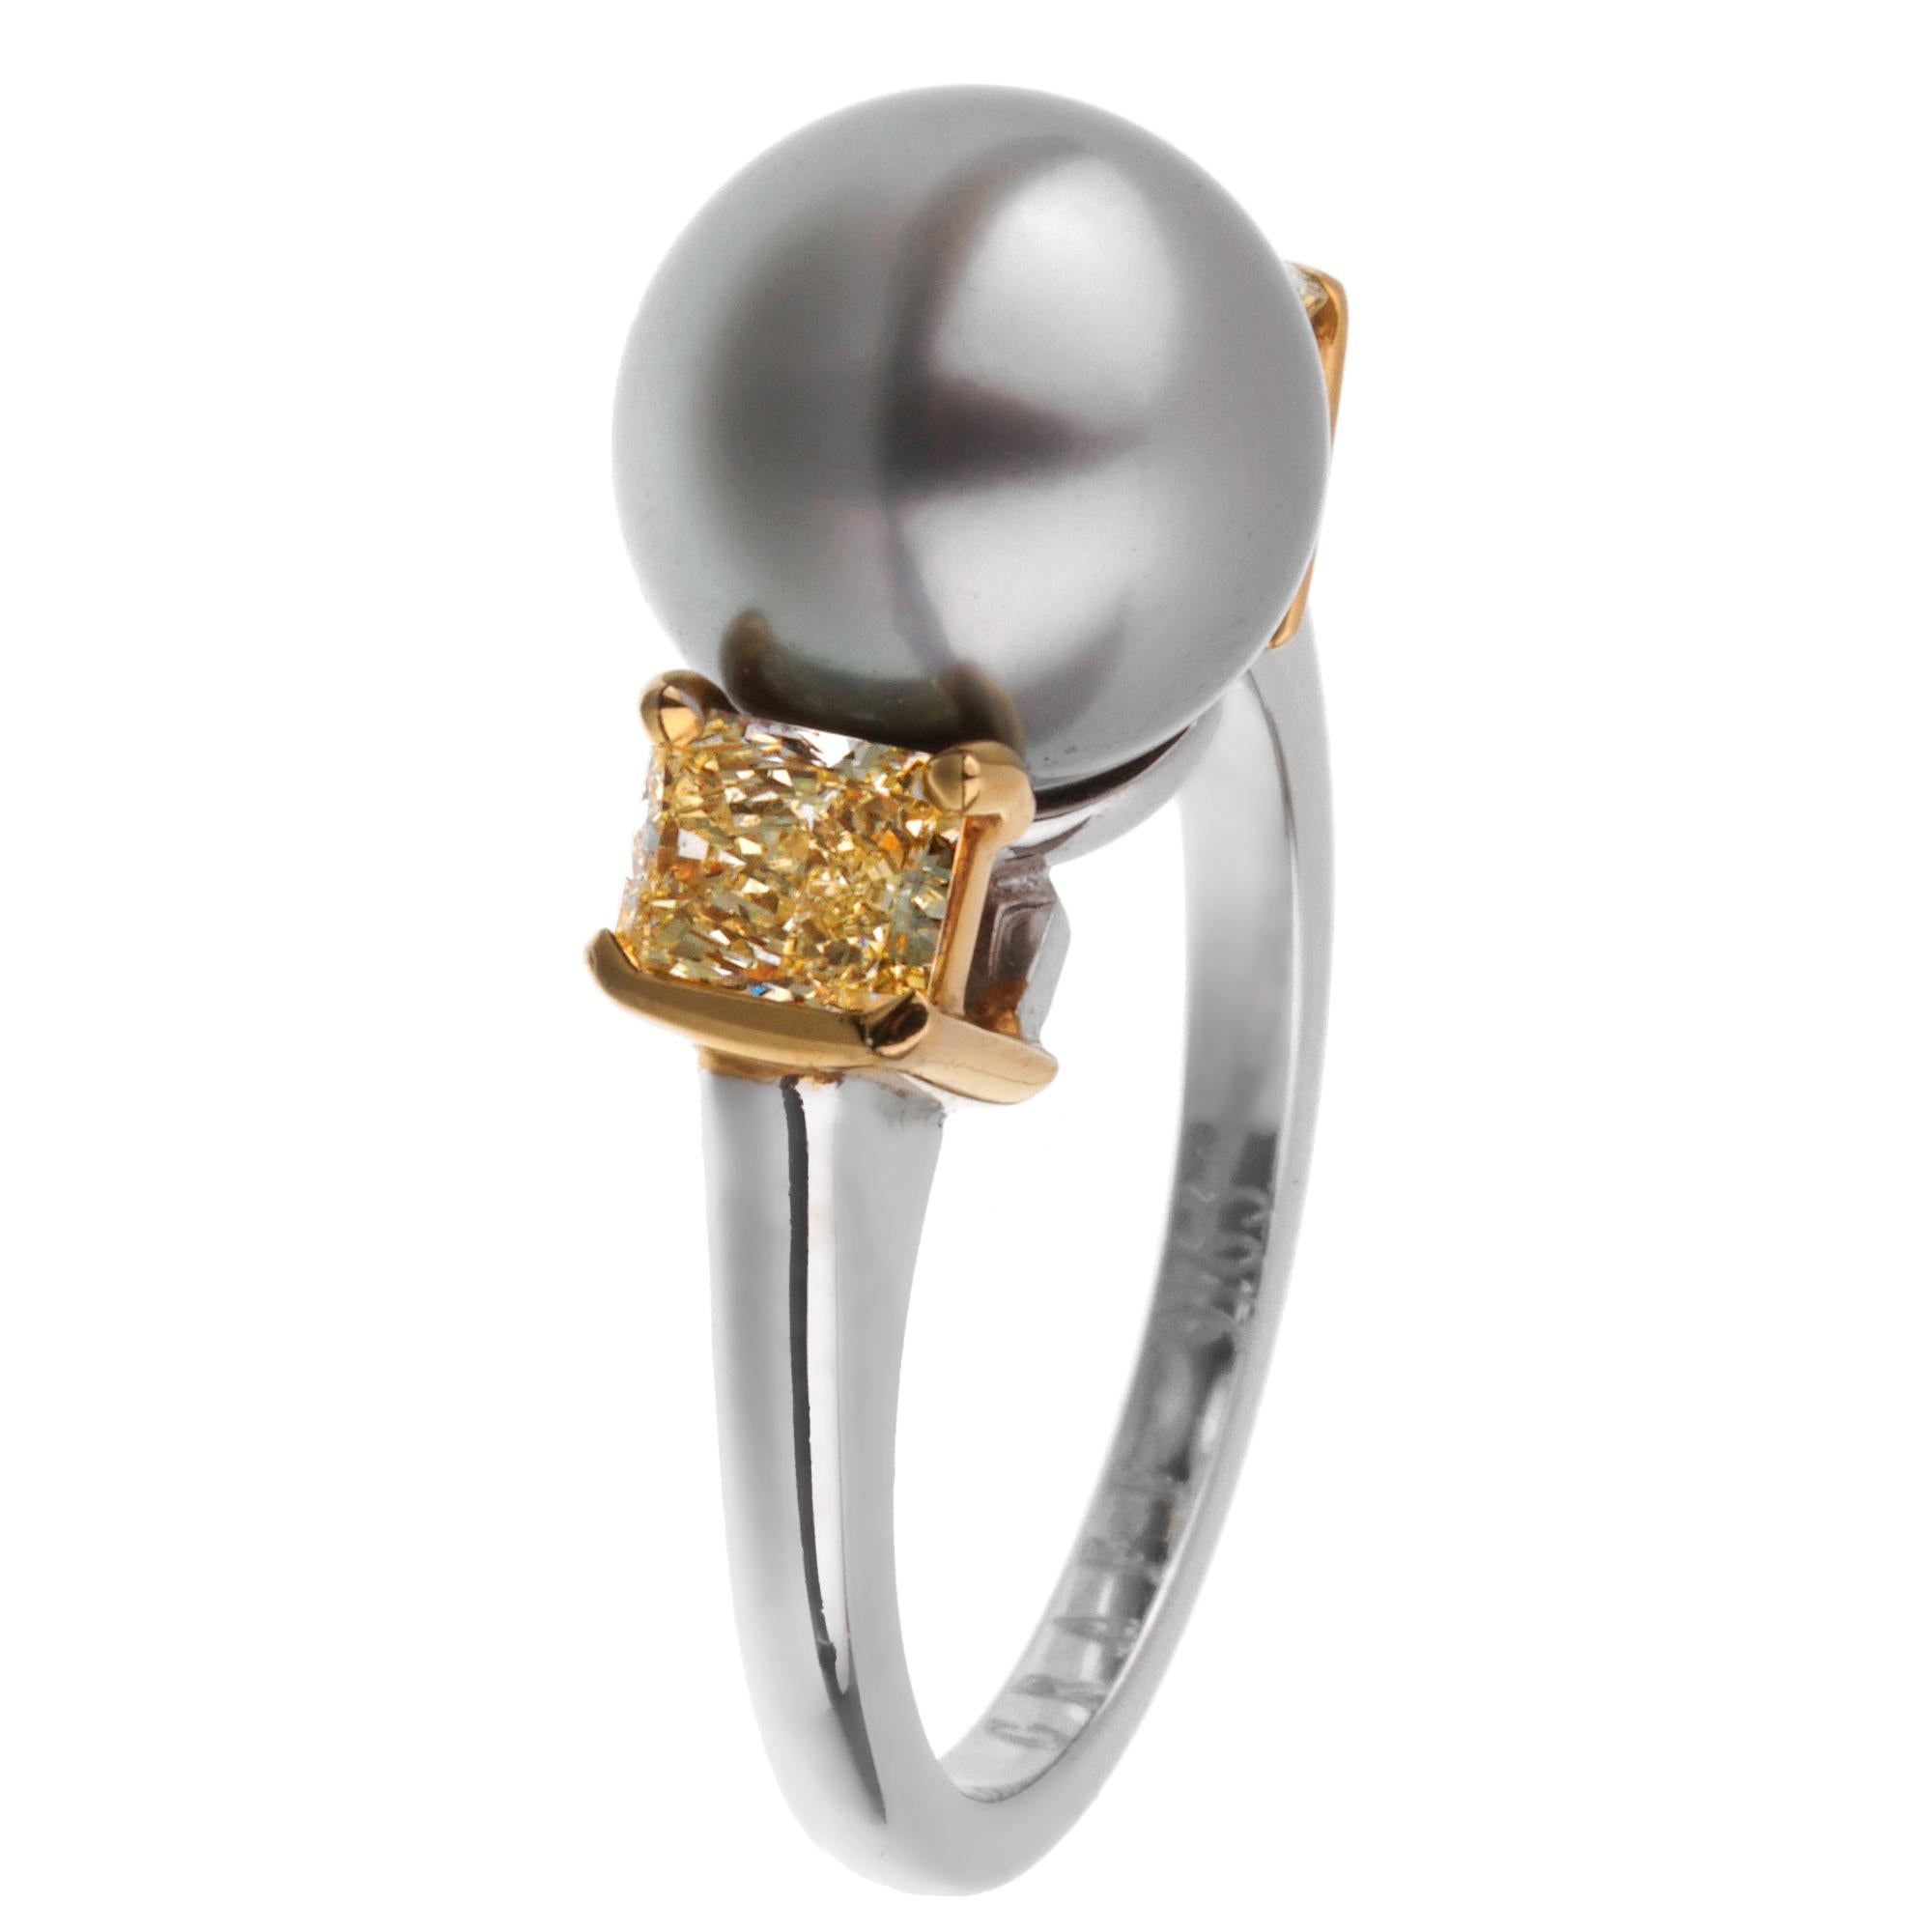 An impressive Graff diamond cocktail ring showcasing a 9.8mm gray pearl adorned by 2 radiant cut yellow diamonds set in 18k yellow gold. The ring is crafted in platinum and measures a size 5 1/2 and can be resized.